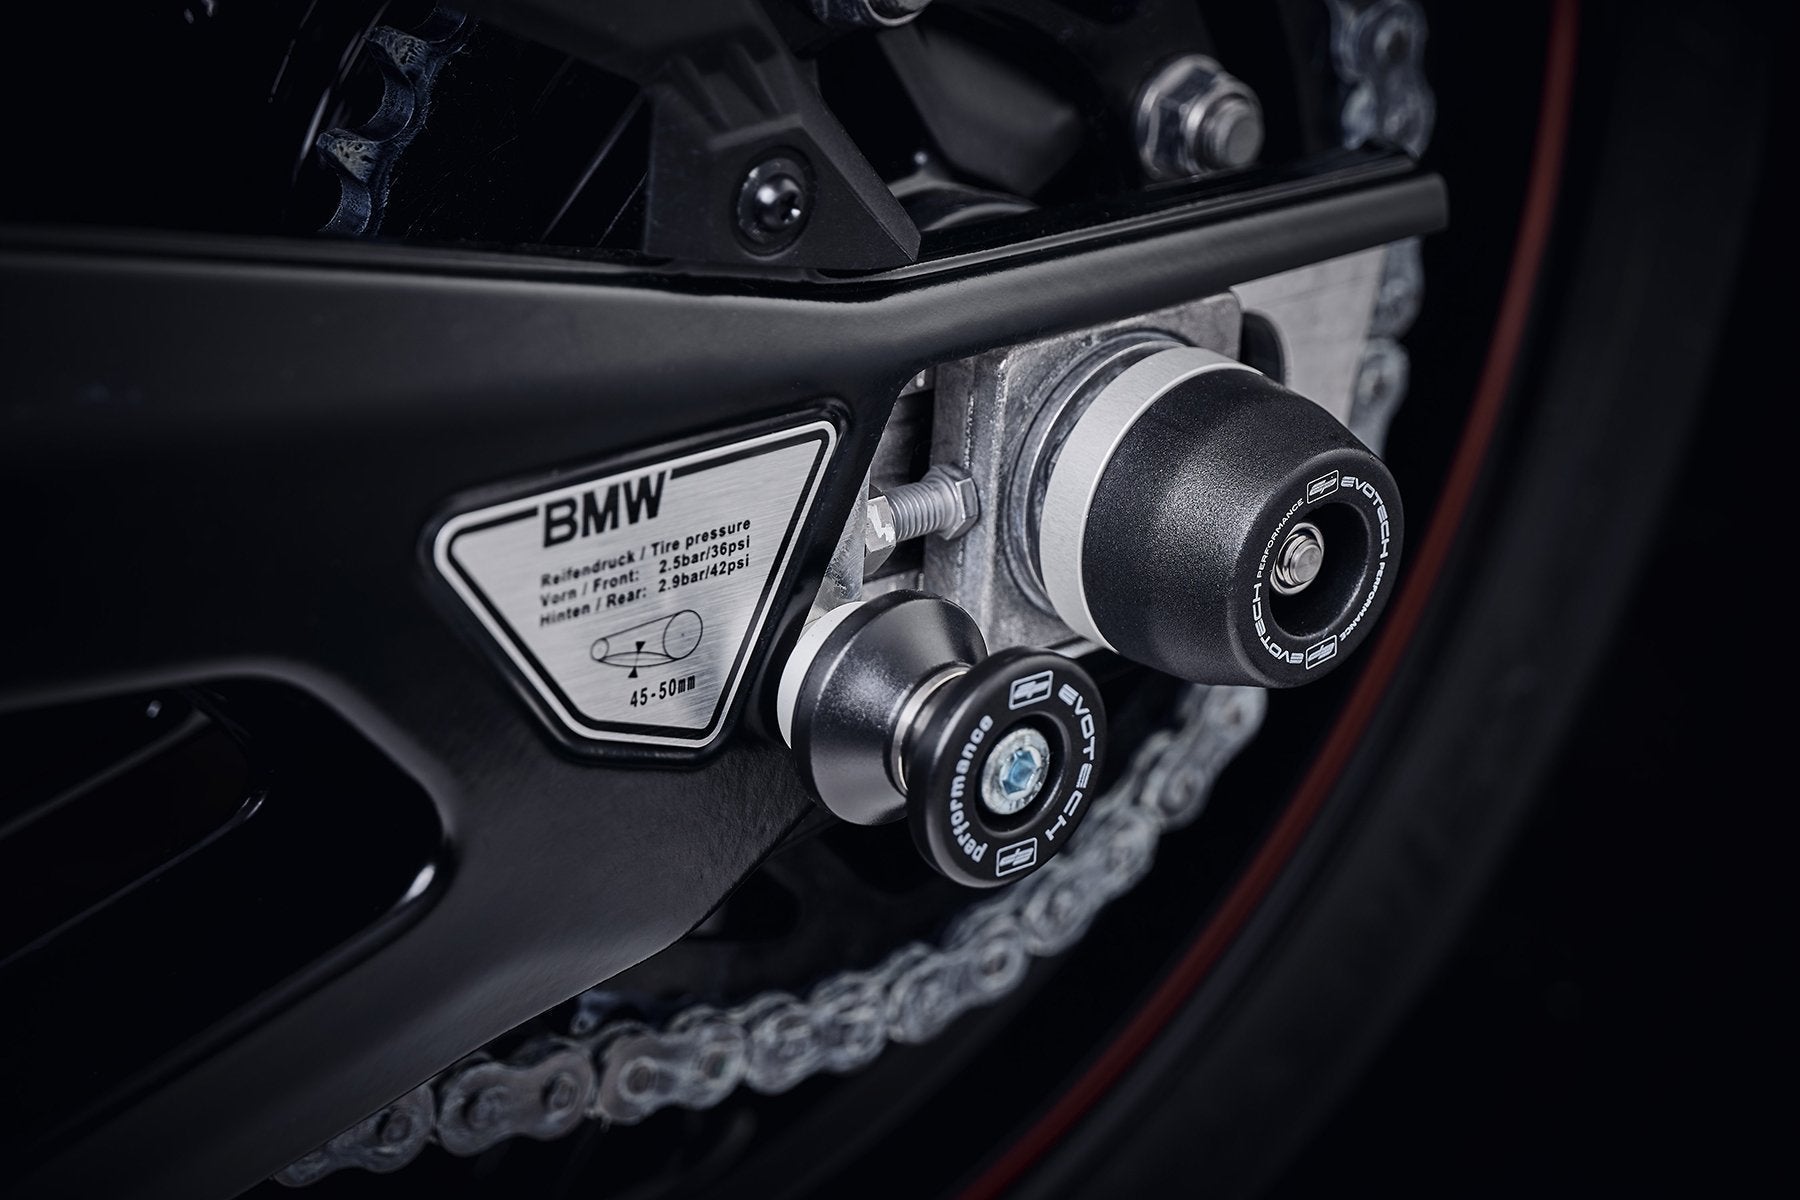 The nearside of the rear wheel of the BMW M 1000 R with EP Spindle Bobbins Crash Protection attached, guarding the swingarm and chain.